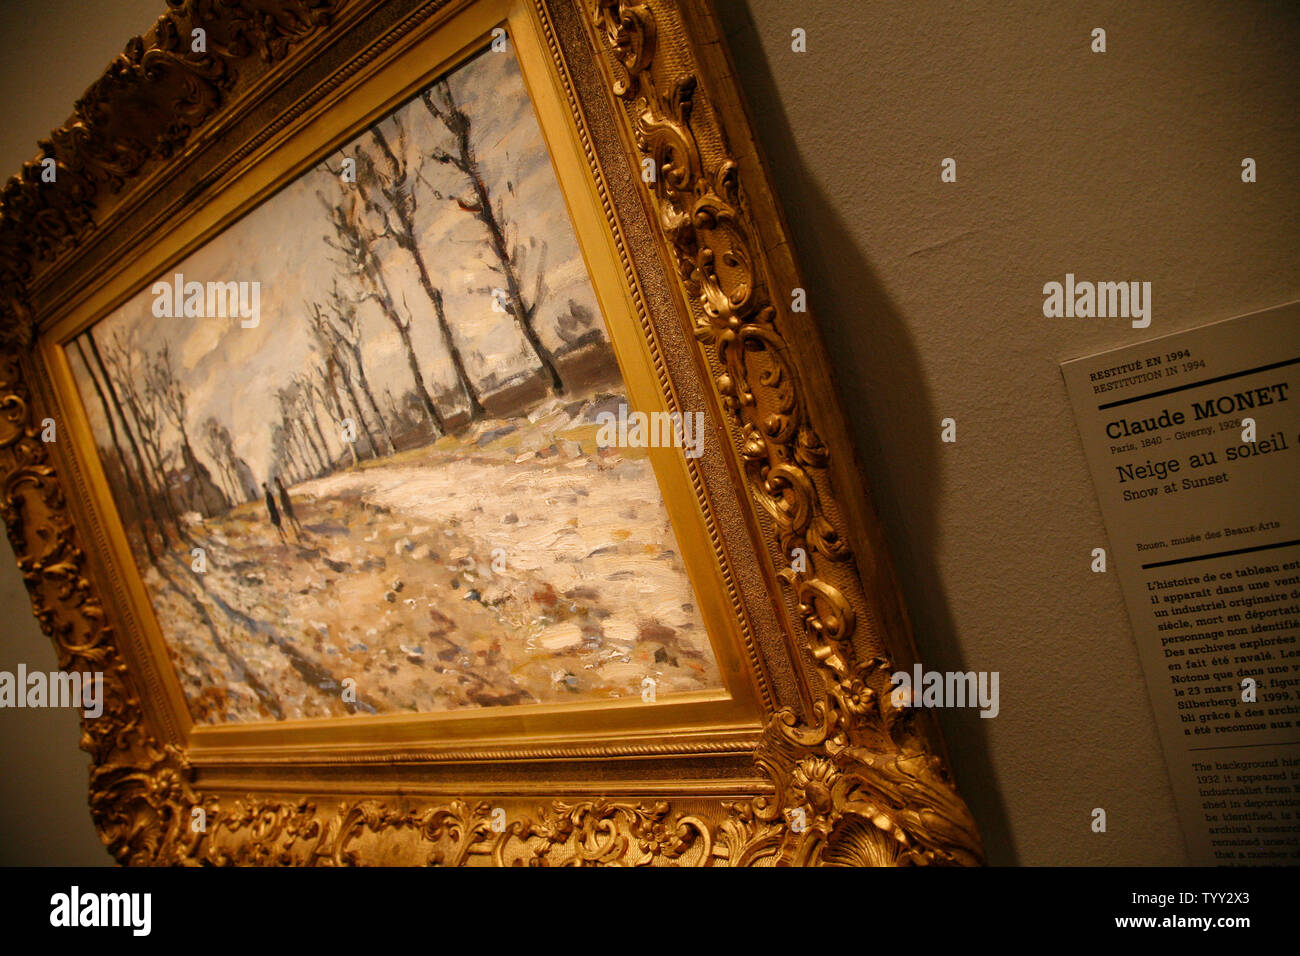 Claude Monet's 'Snow at Sunset' hangs on the wall at the opening of an exhibition in Paris on June 25, 2008.  The exhibition, taking place at the Jewish Art and History Museum, features precious art pieces that were stolen from Jewish homes during the Nazi occupation of France during World War II.   (UPI Photo/David Silpa) Stock Photo